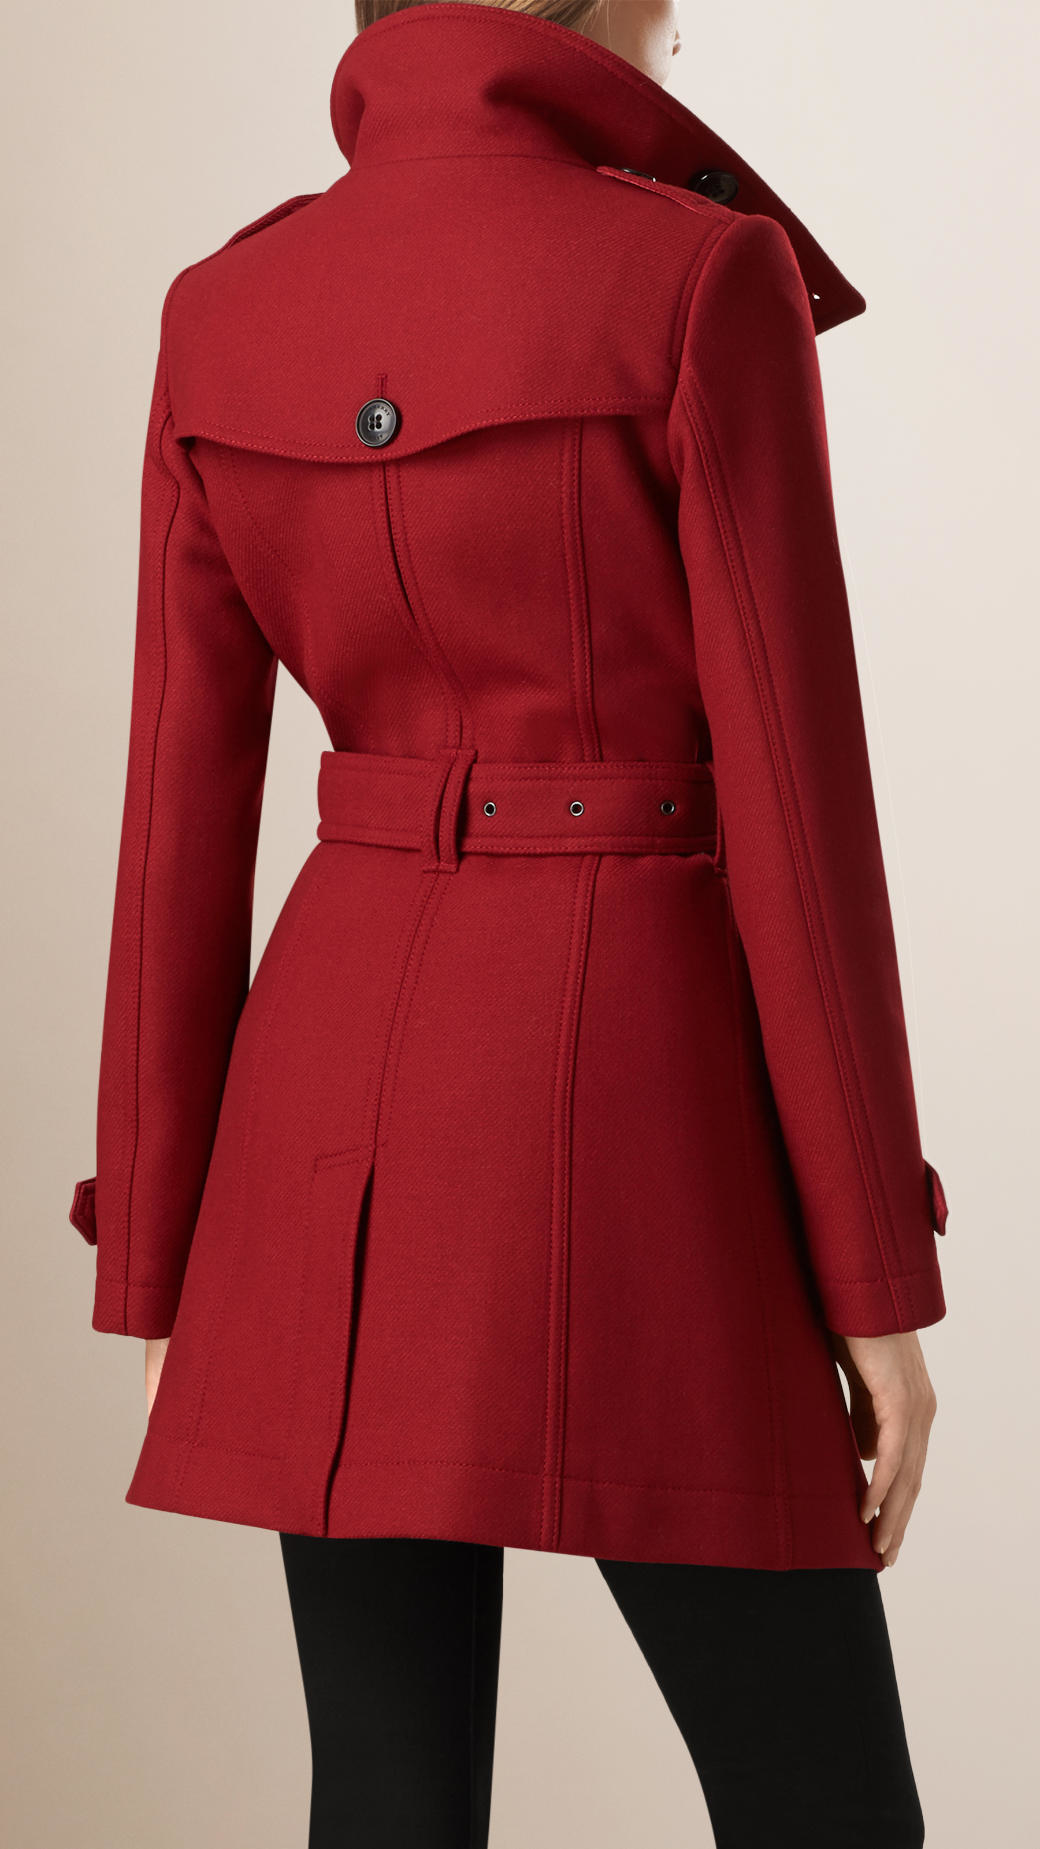 Lyst - Burberry Funnel Neck Wool Cashmere Twill Trench Coat in Red